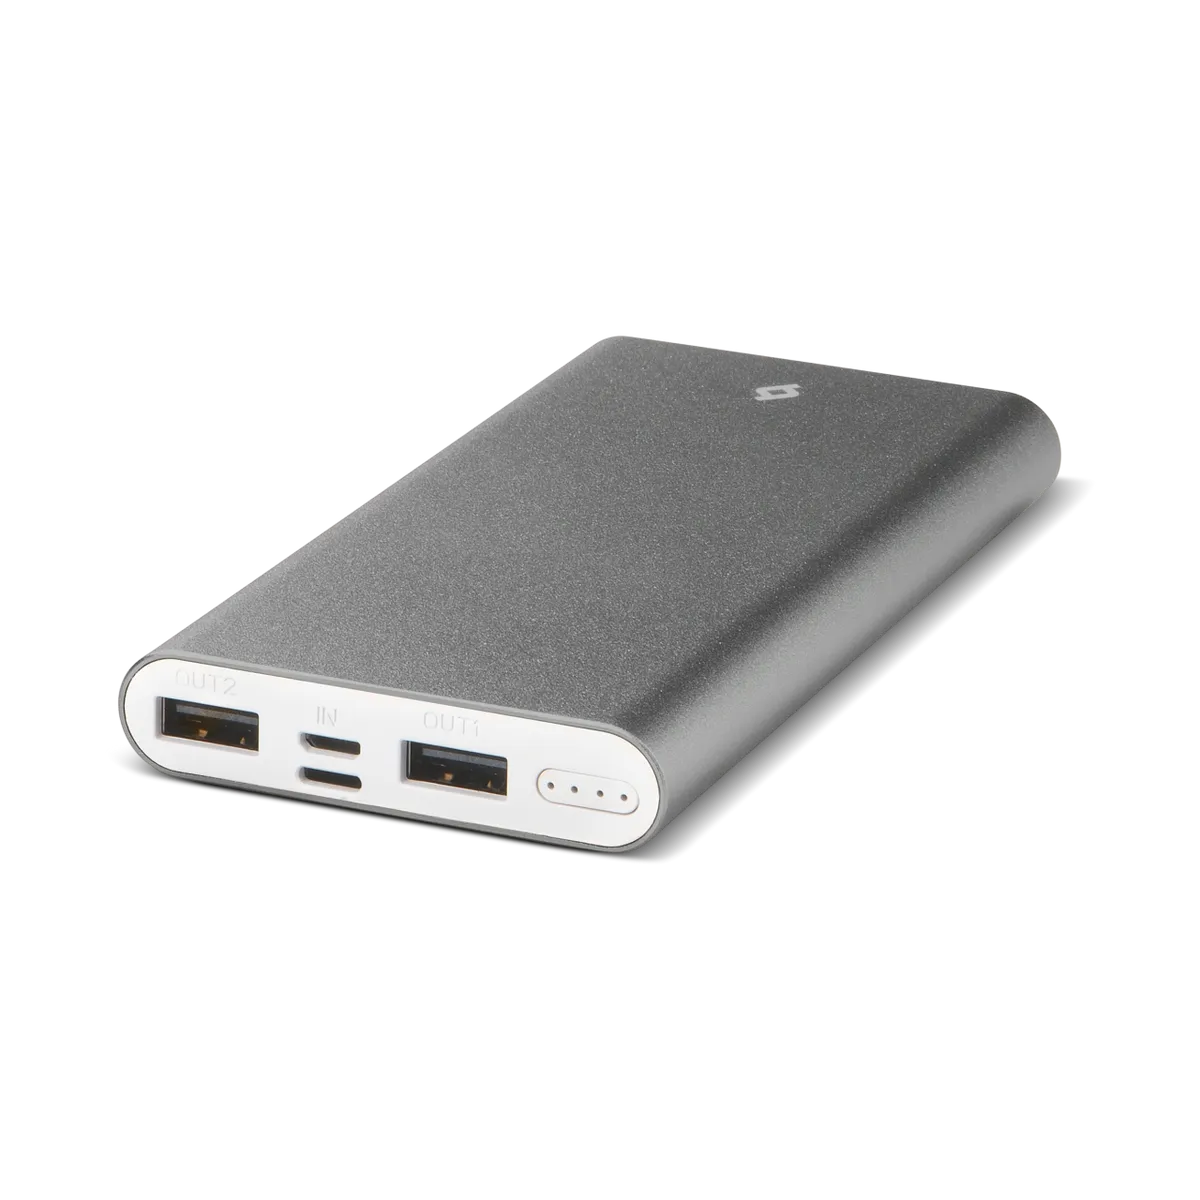 ttec AlumiSlim S Universal Mobile Charger Power Bank 10000 mAh in silver